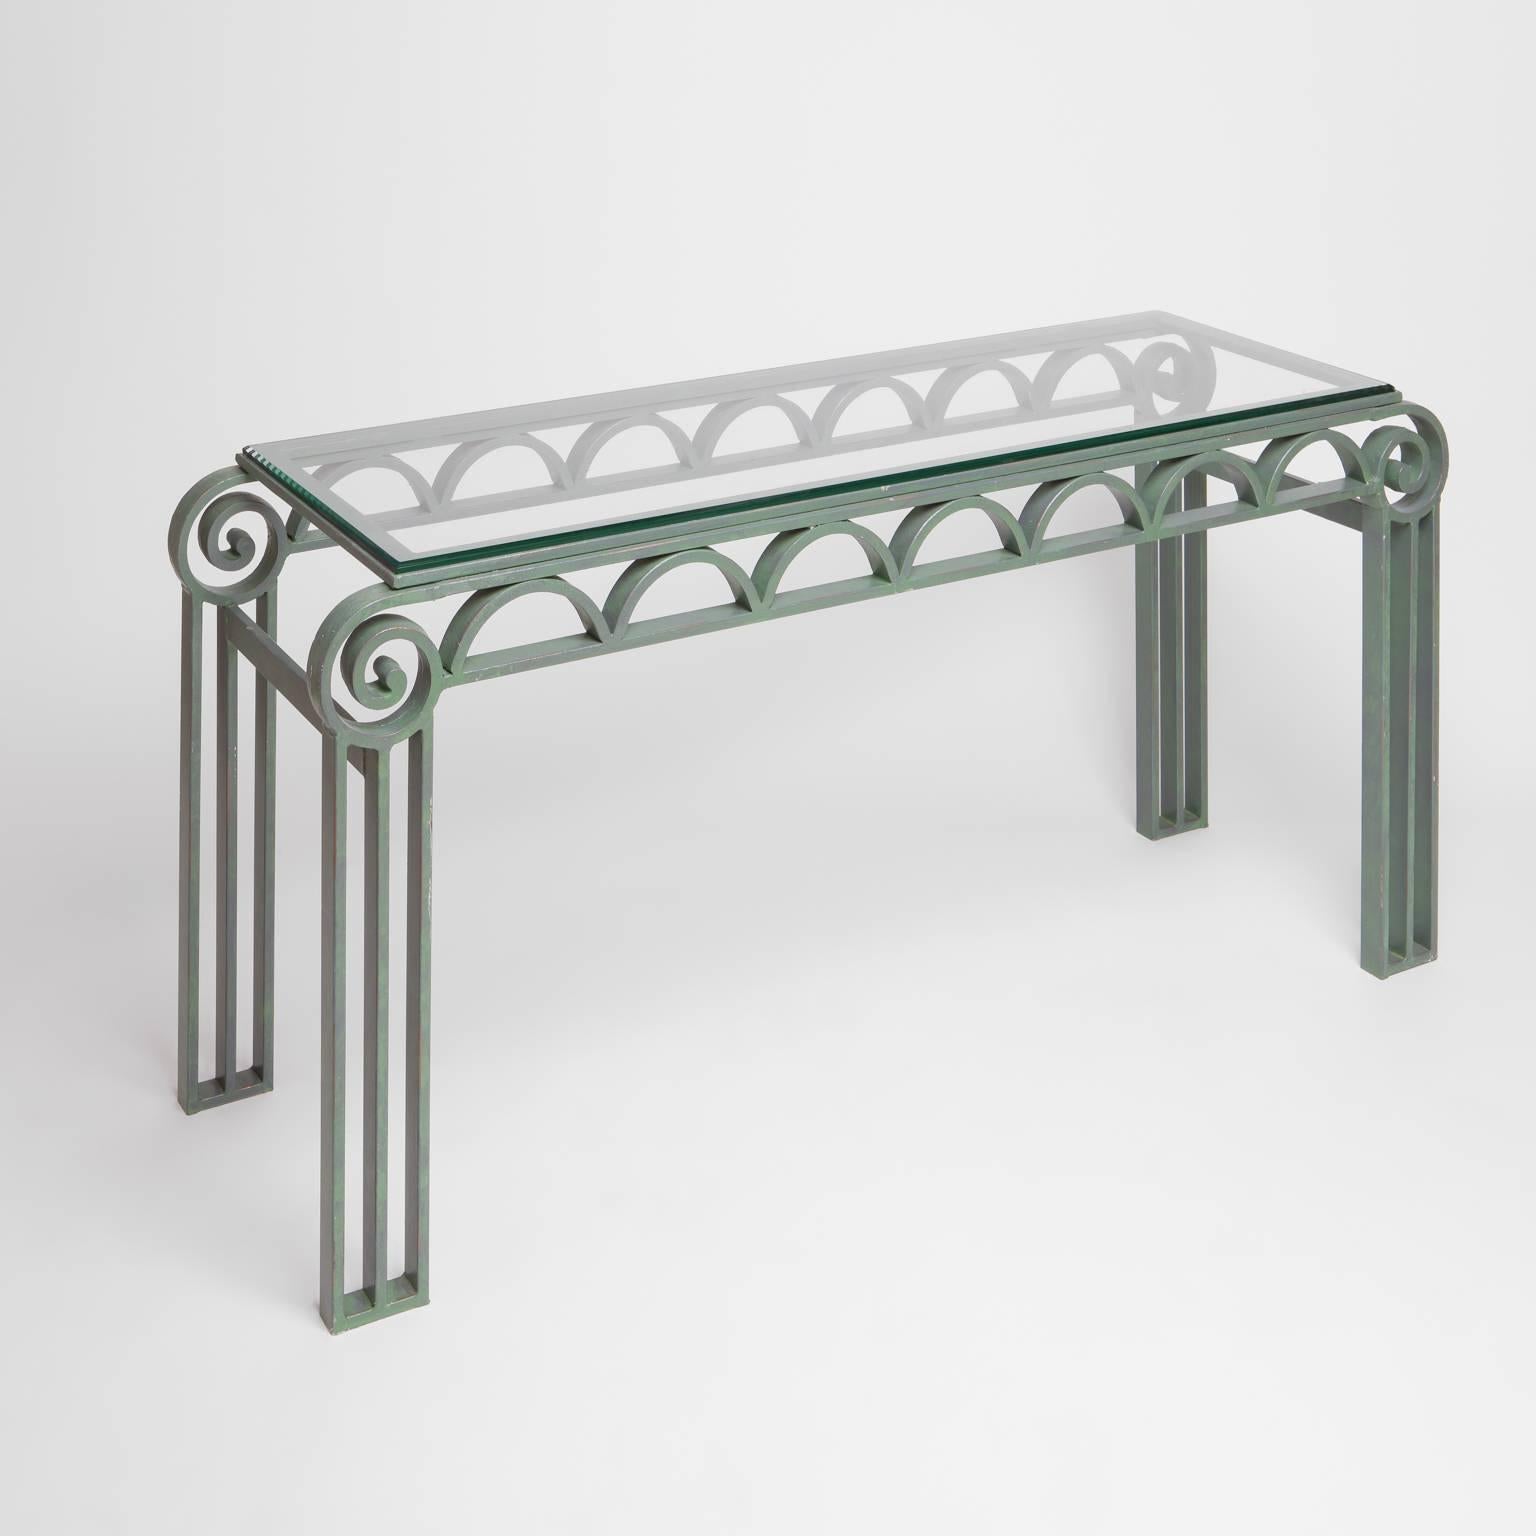 Art Deco style iron console table with glass top. Green painted iron with column legs meeting scrolled corners and half moon apron. Glass top.
   